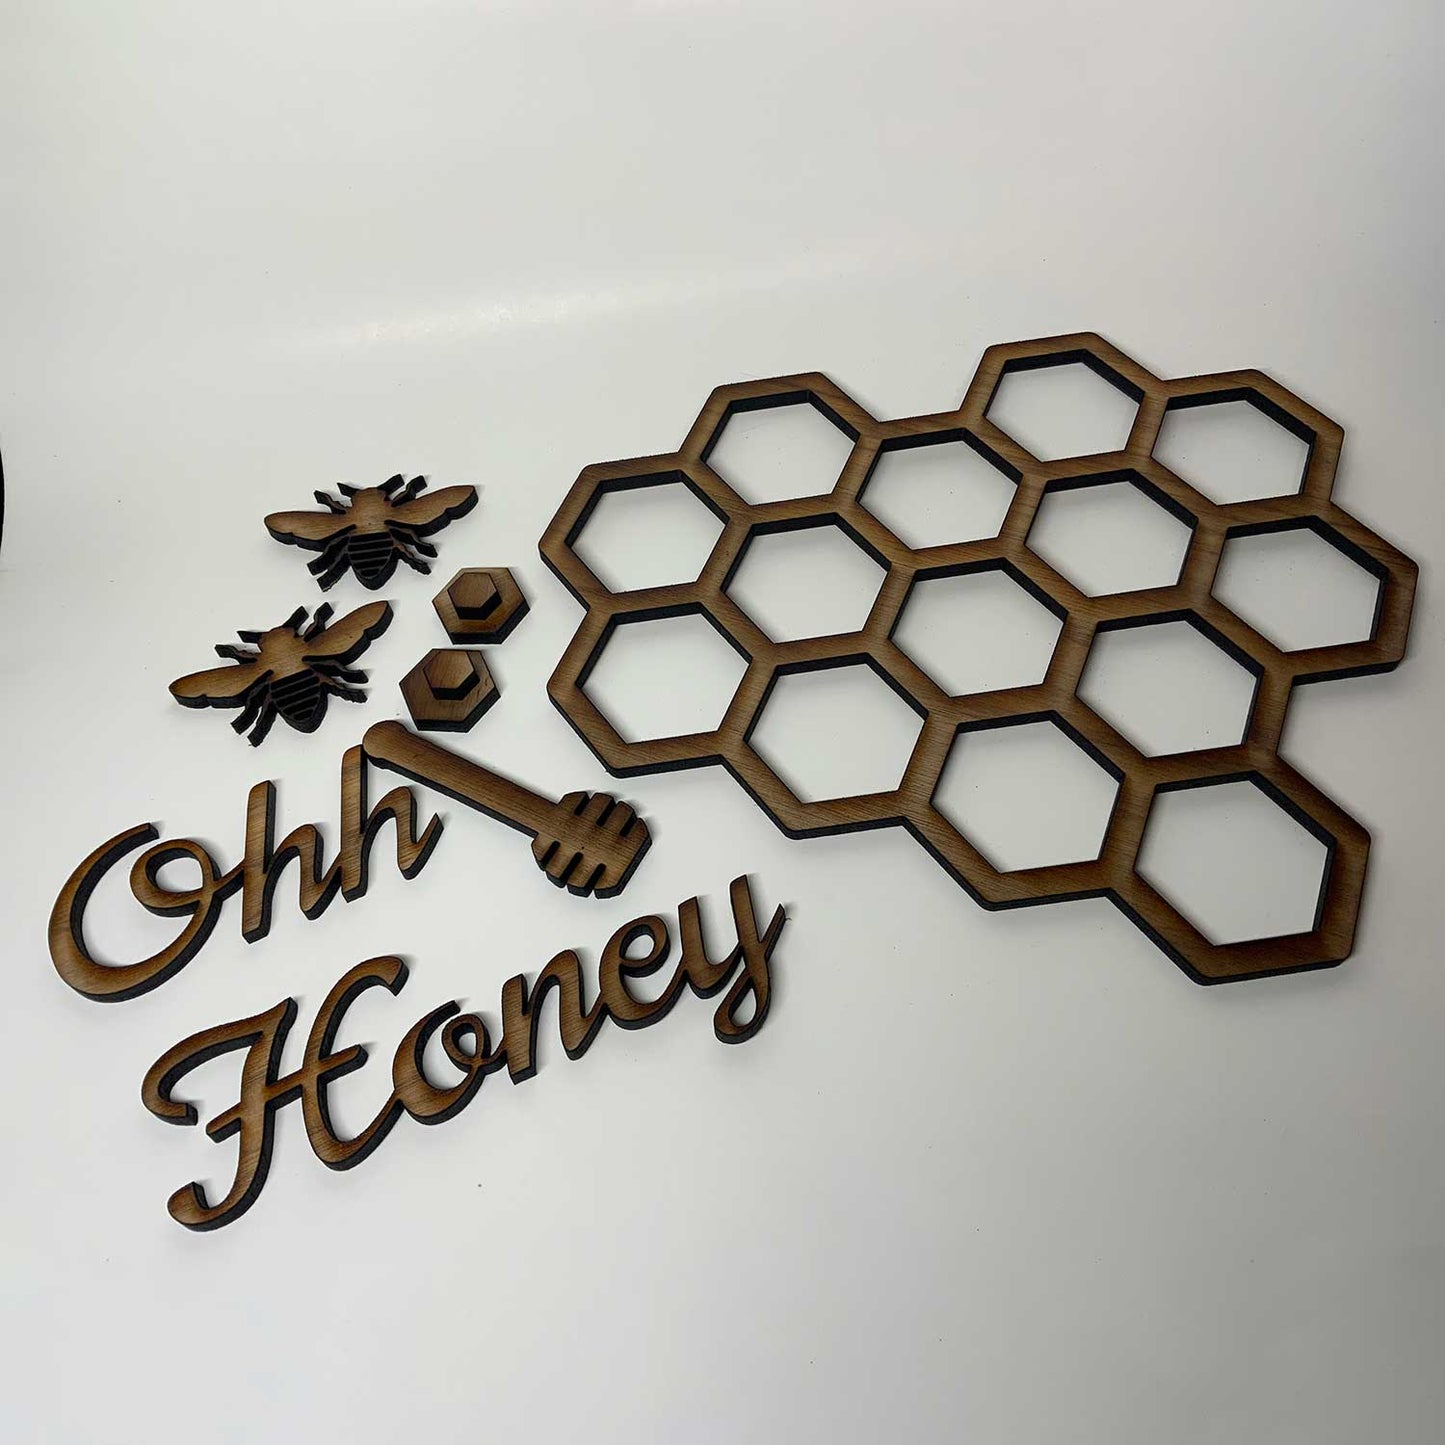 WORKER BEES HONEYCOMB MAKING HONEY LIGHT SWITCH OUTLET WALL PLATES KITCHEN  DECOR